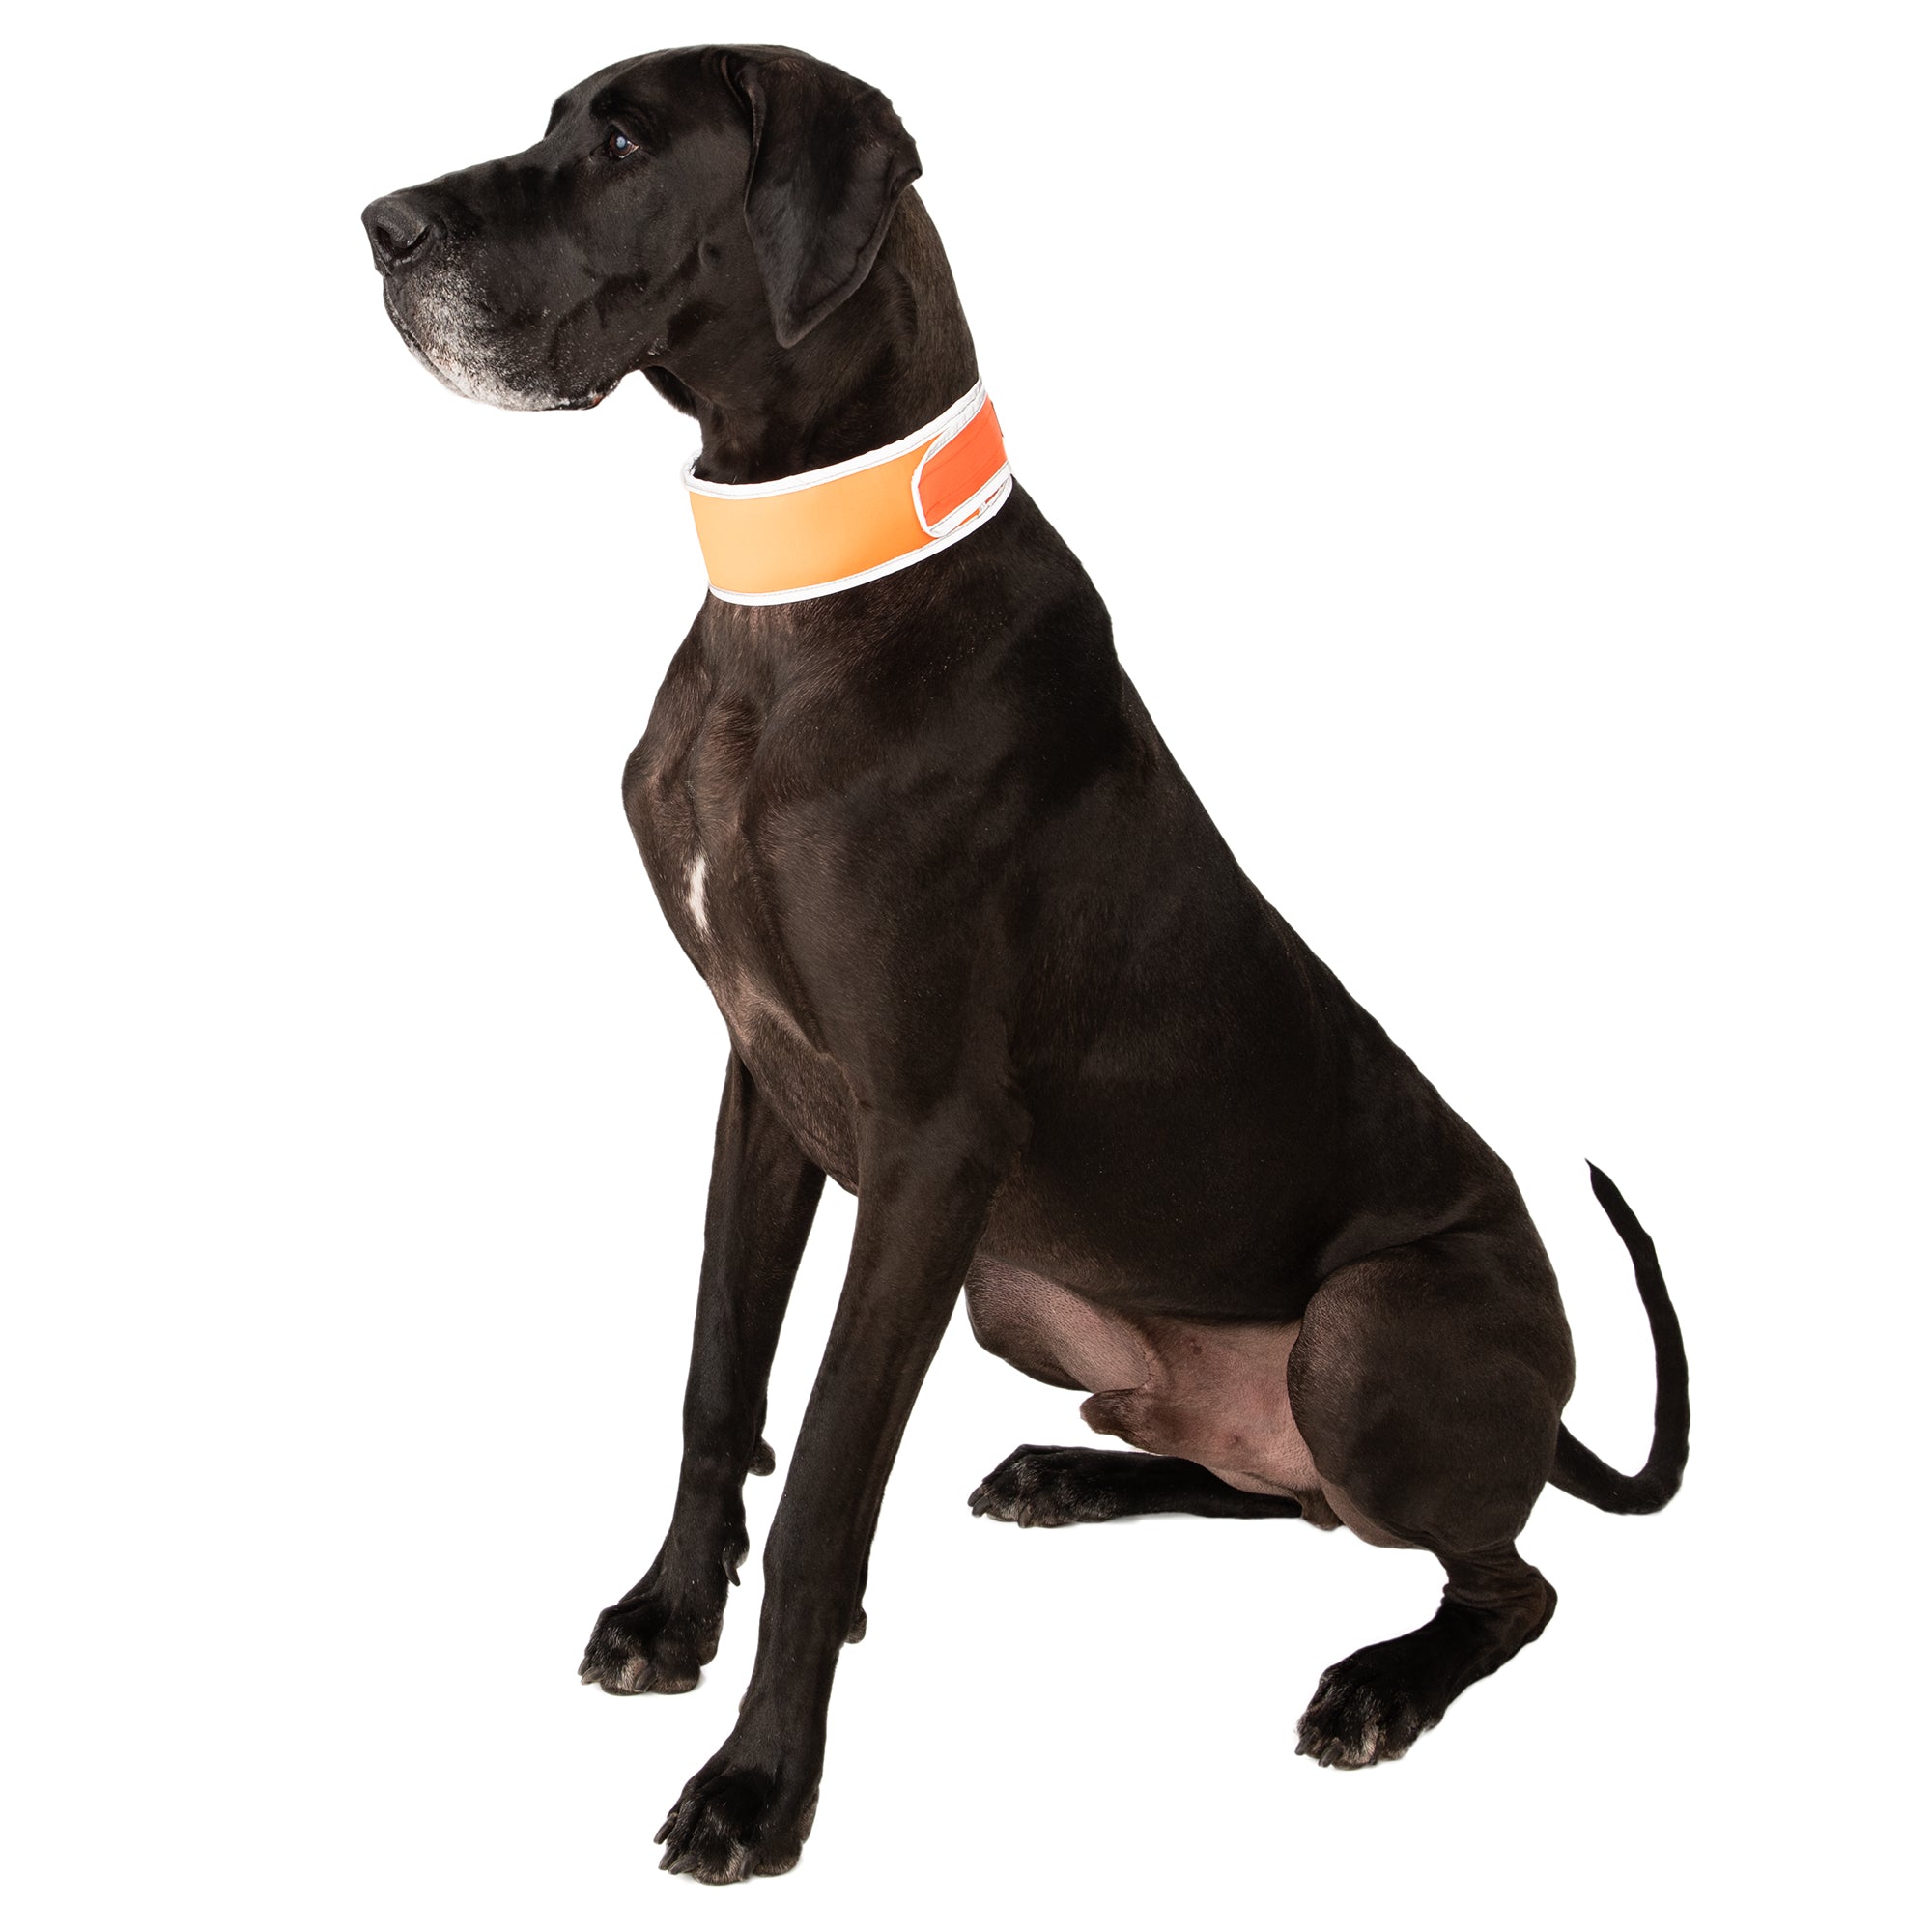 COLLAR Company — pet products manufacturer